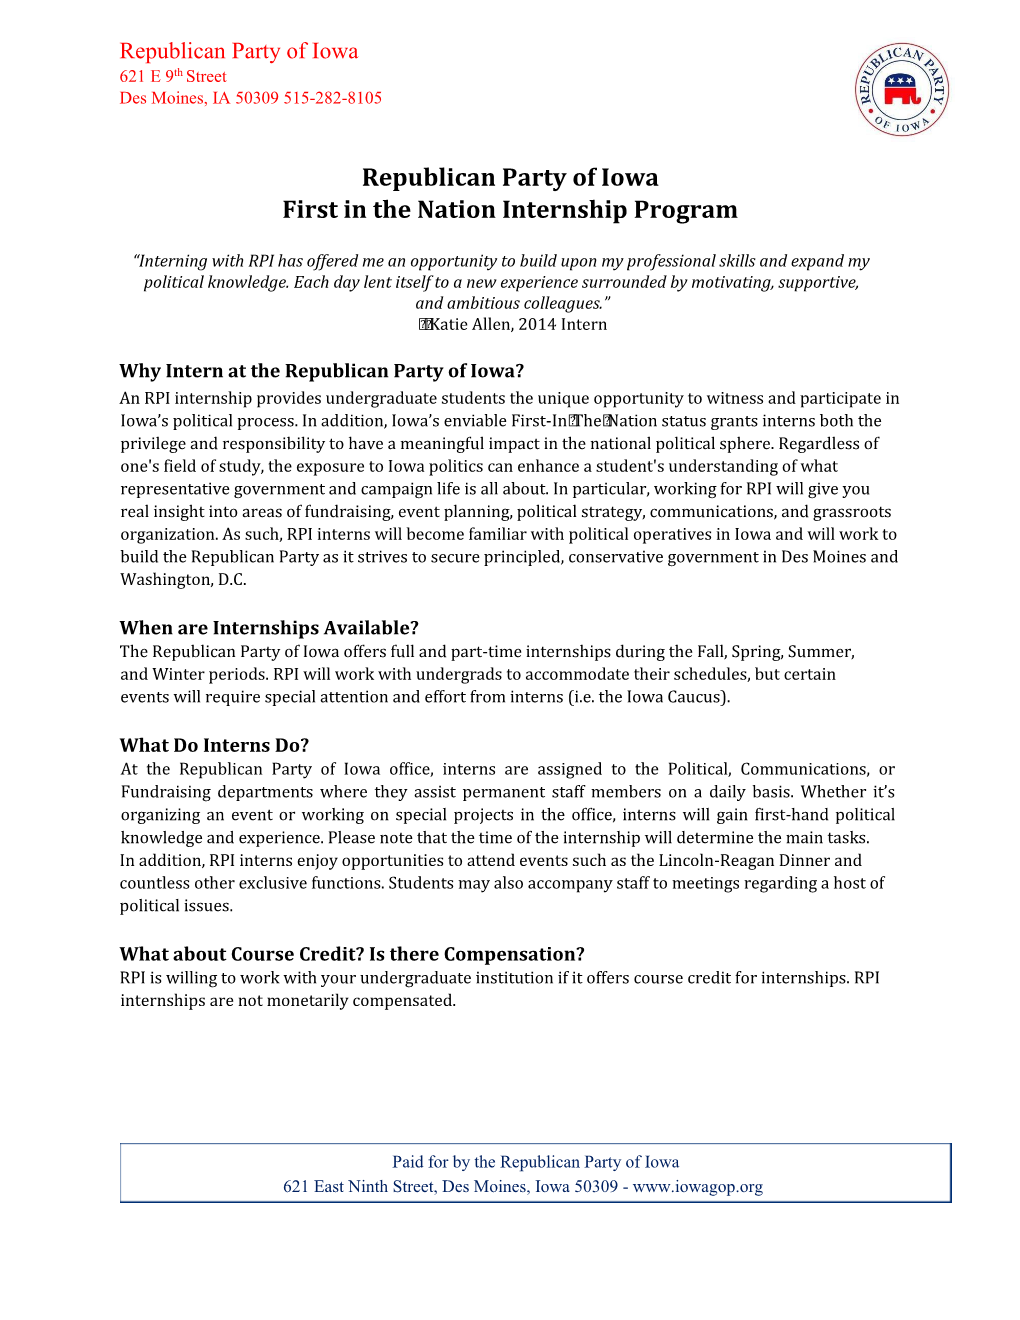 Republican Party of Iowa First in the Nation Internship Program